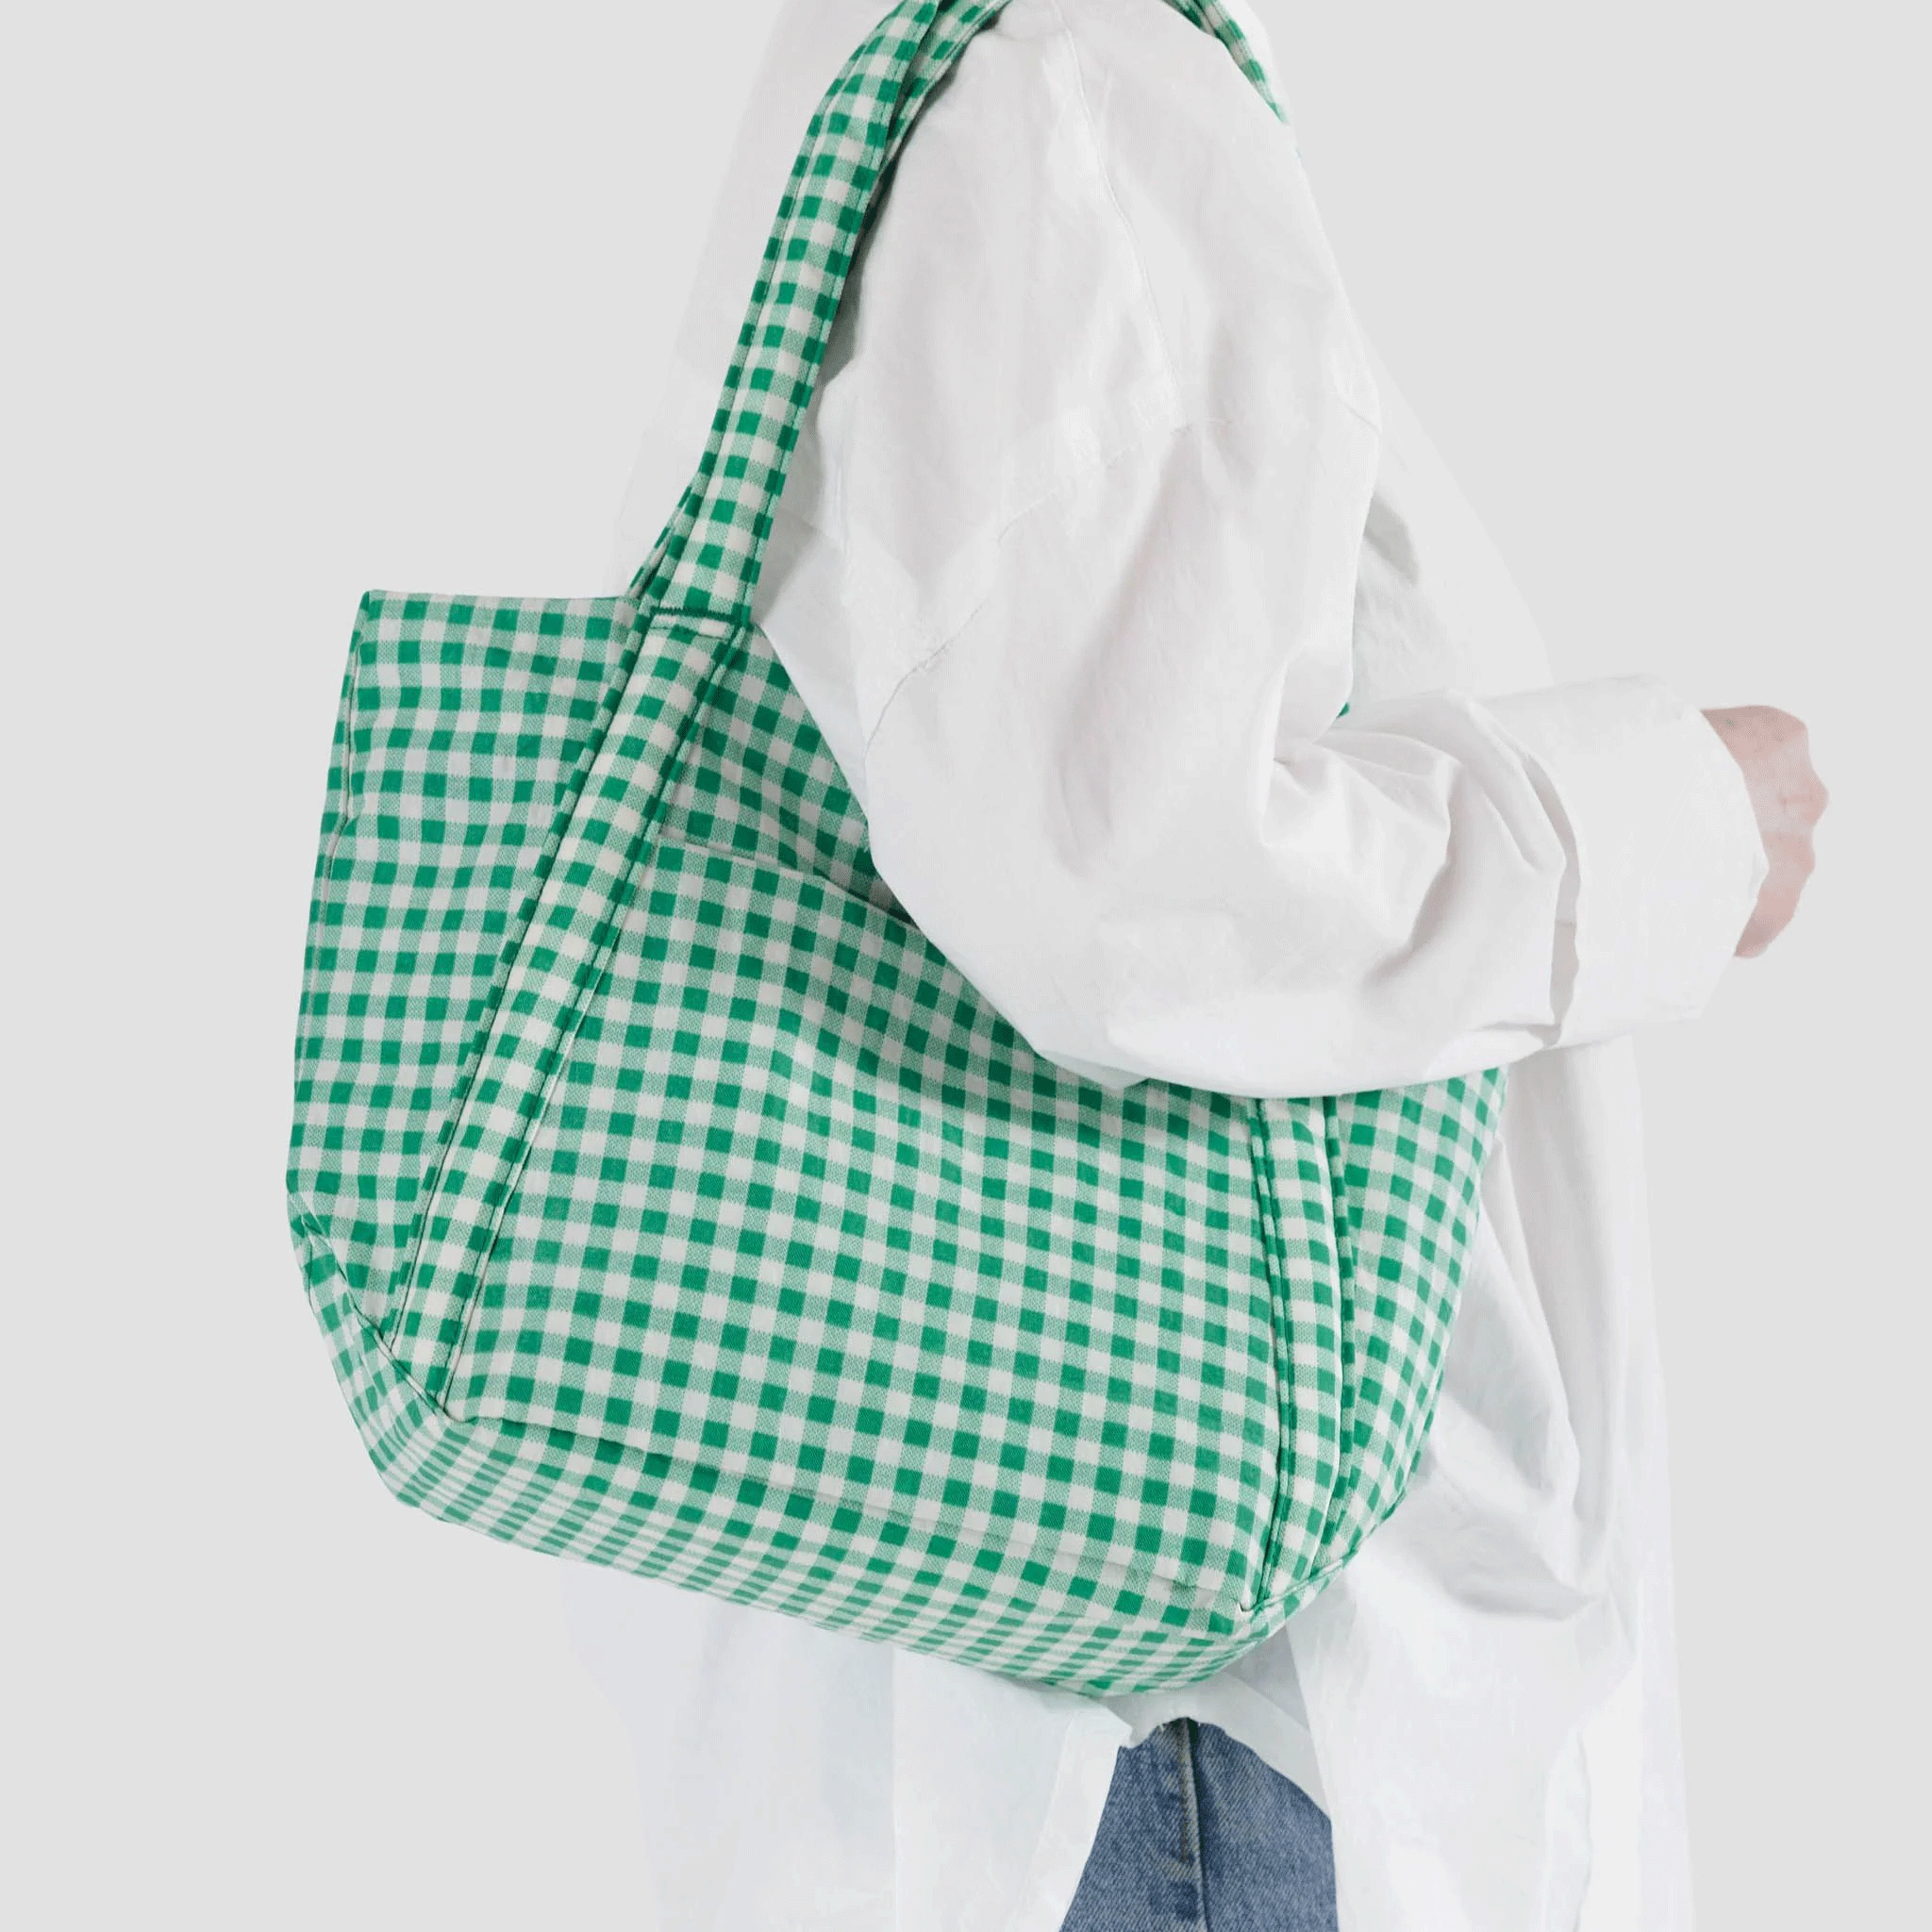 On a white background is a green and white gingham printed tote bag worn on a model.